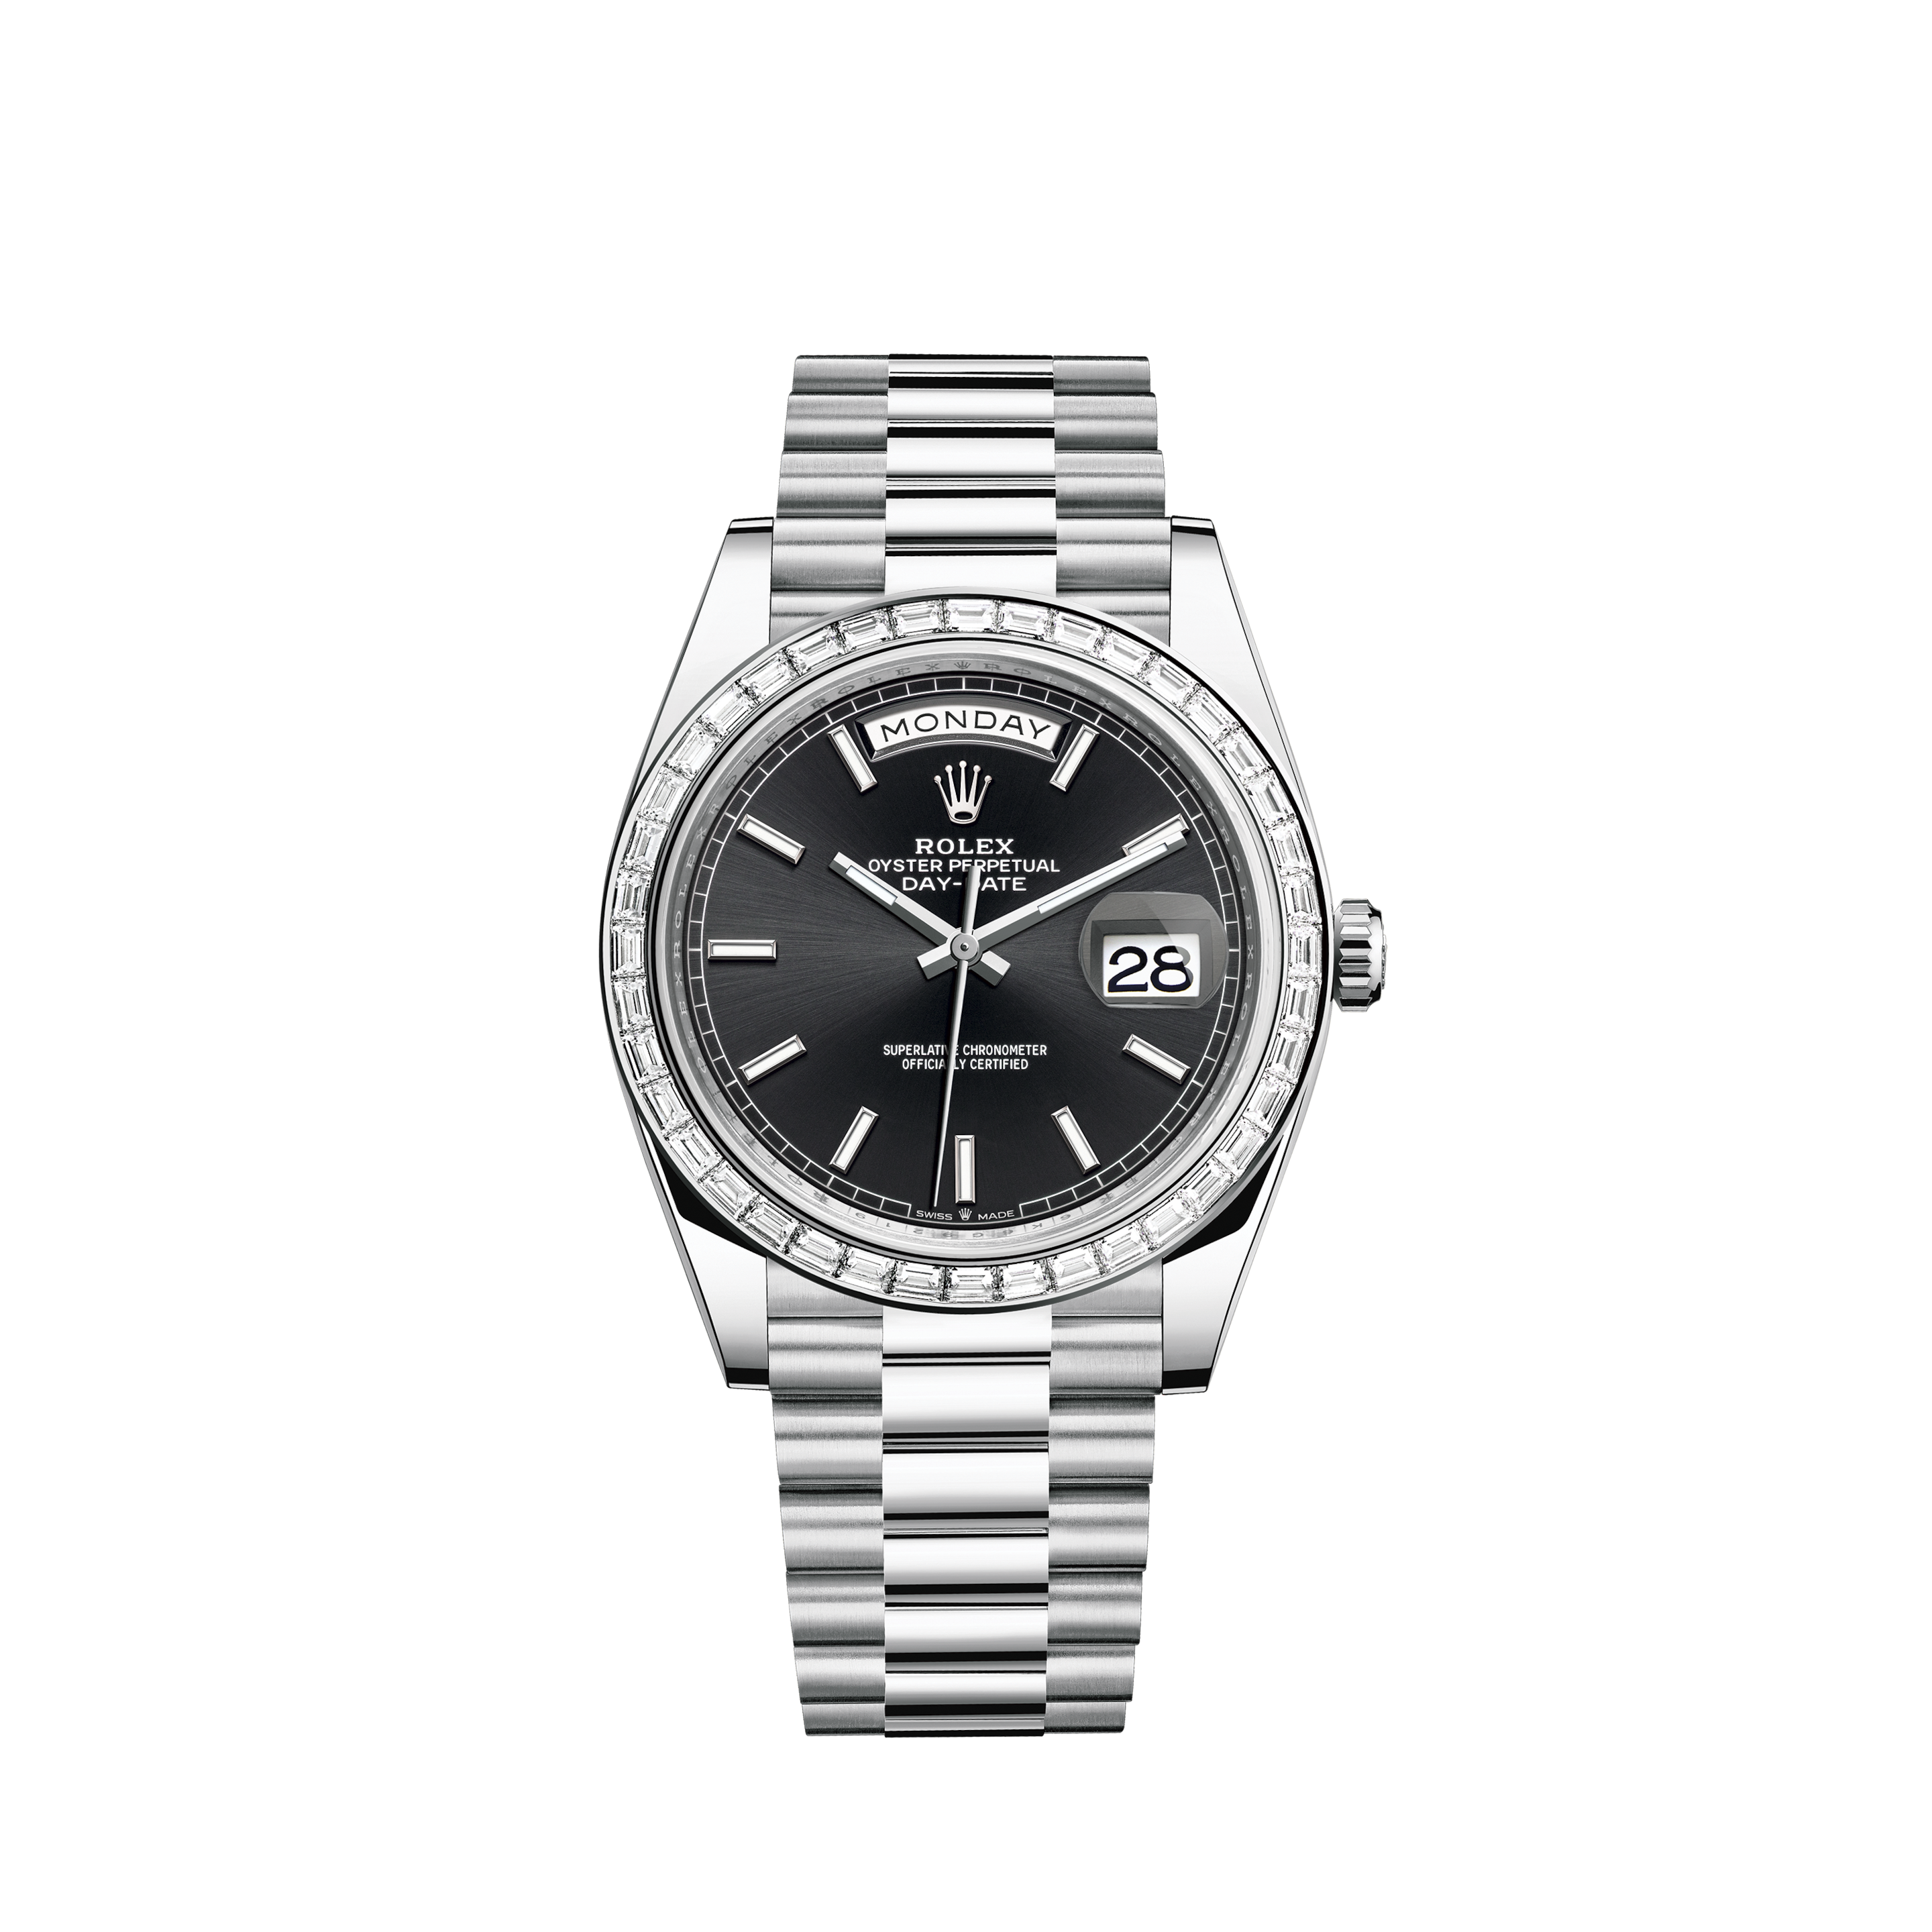 Rolex 26mm Datejust With custom Diamond bezel SS Grey Color Dial Bezel and Lugs with Diamond Accent RT Deployment buckleRolex 26mm Datejust With custom Diamond bezel SS Grey Color Dial with Diamond Accent RT Deployment buckle